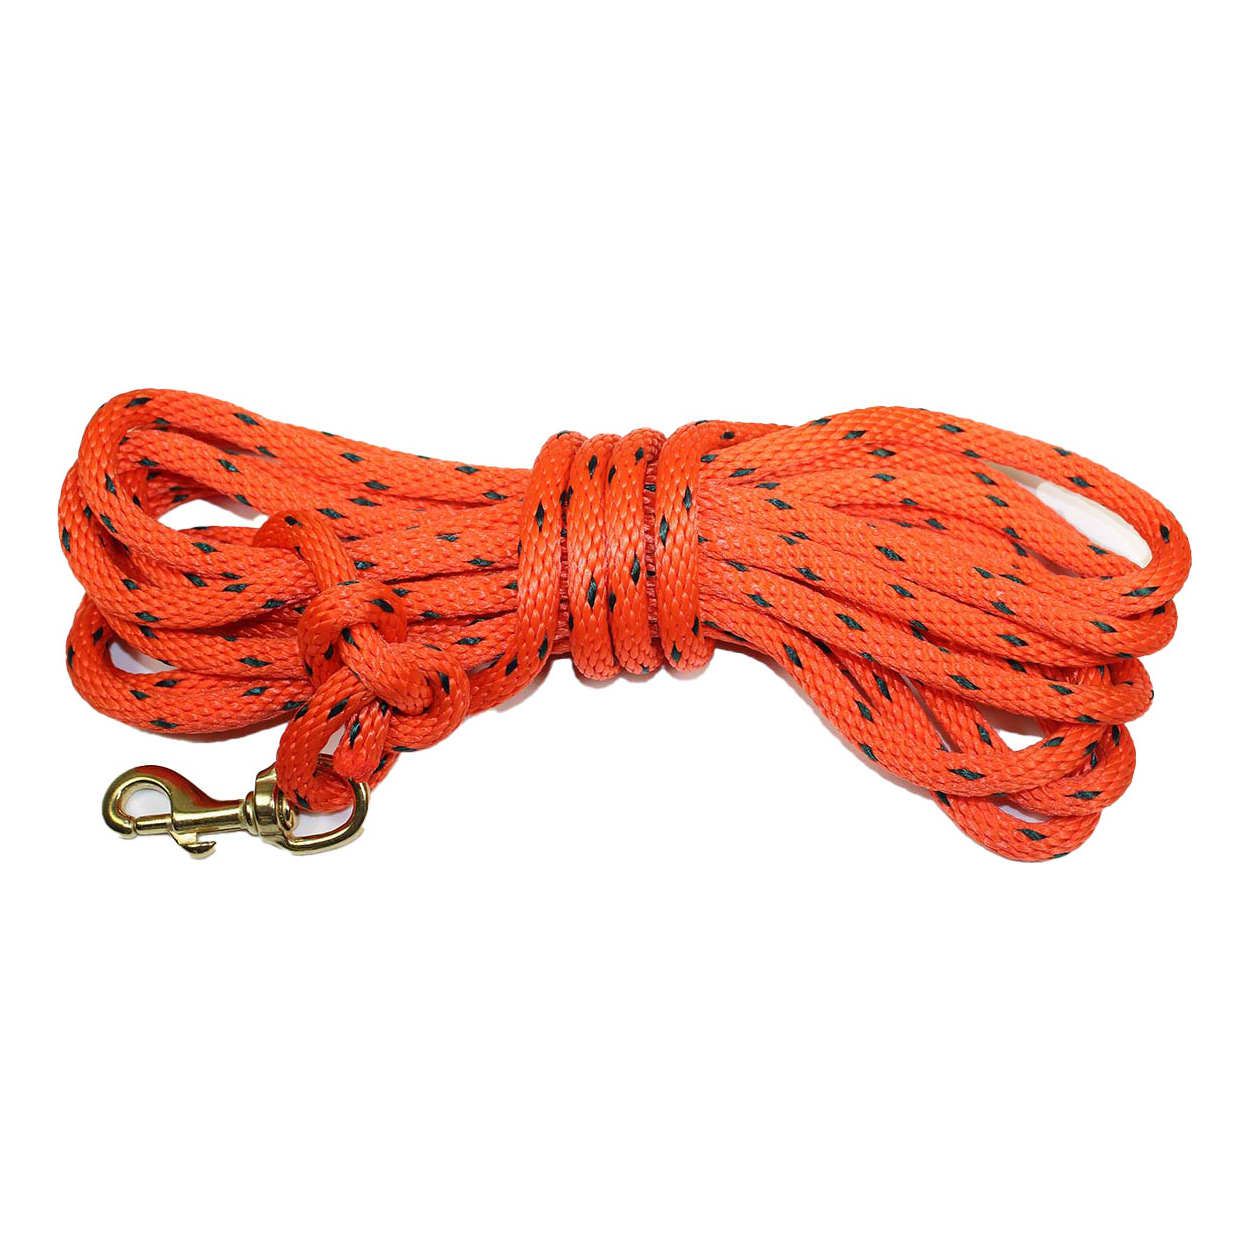 OMNIPET Dog Check Cords - 20'